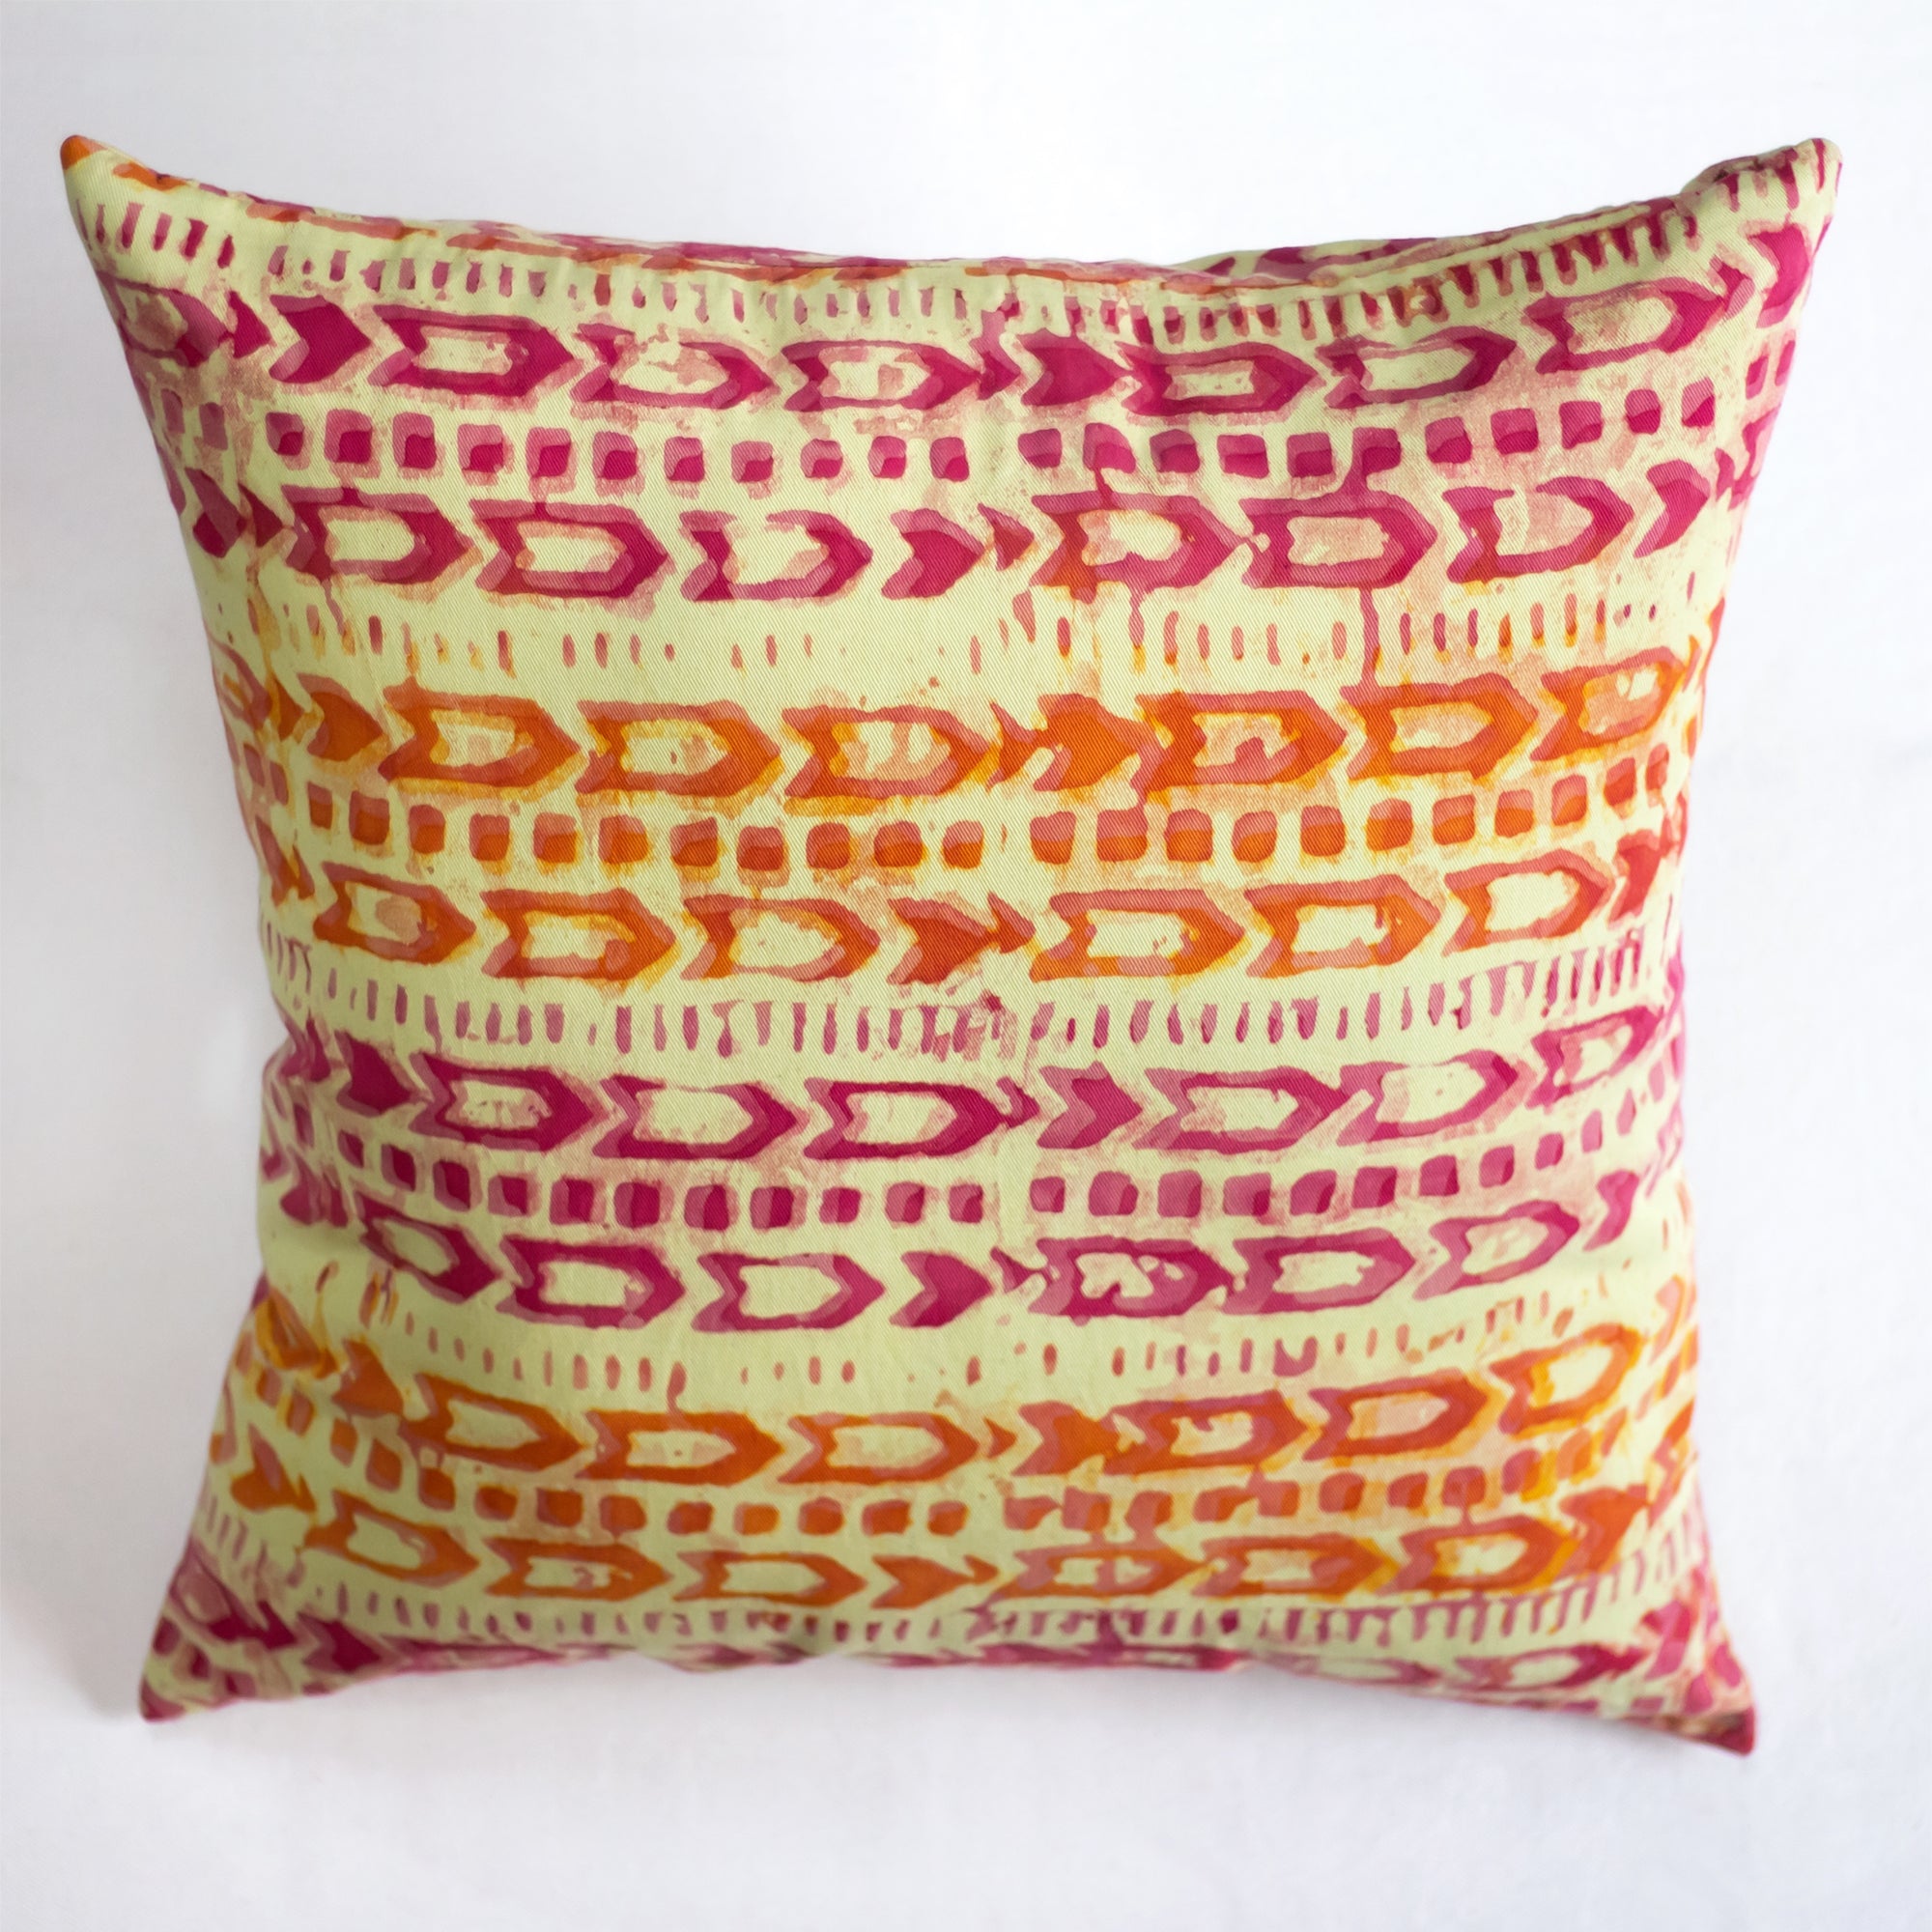 Hand Painted Accent Pillow Cover -  Nroute Horizontal